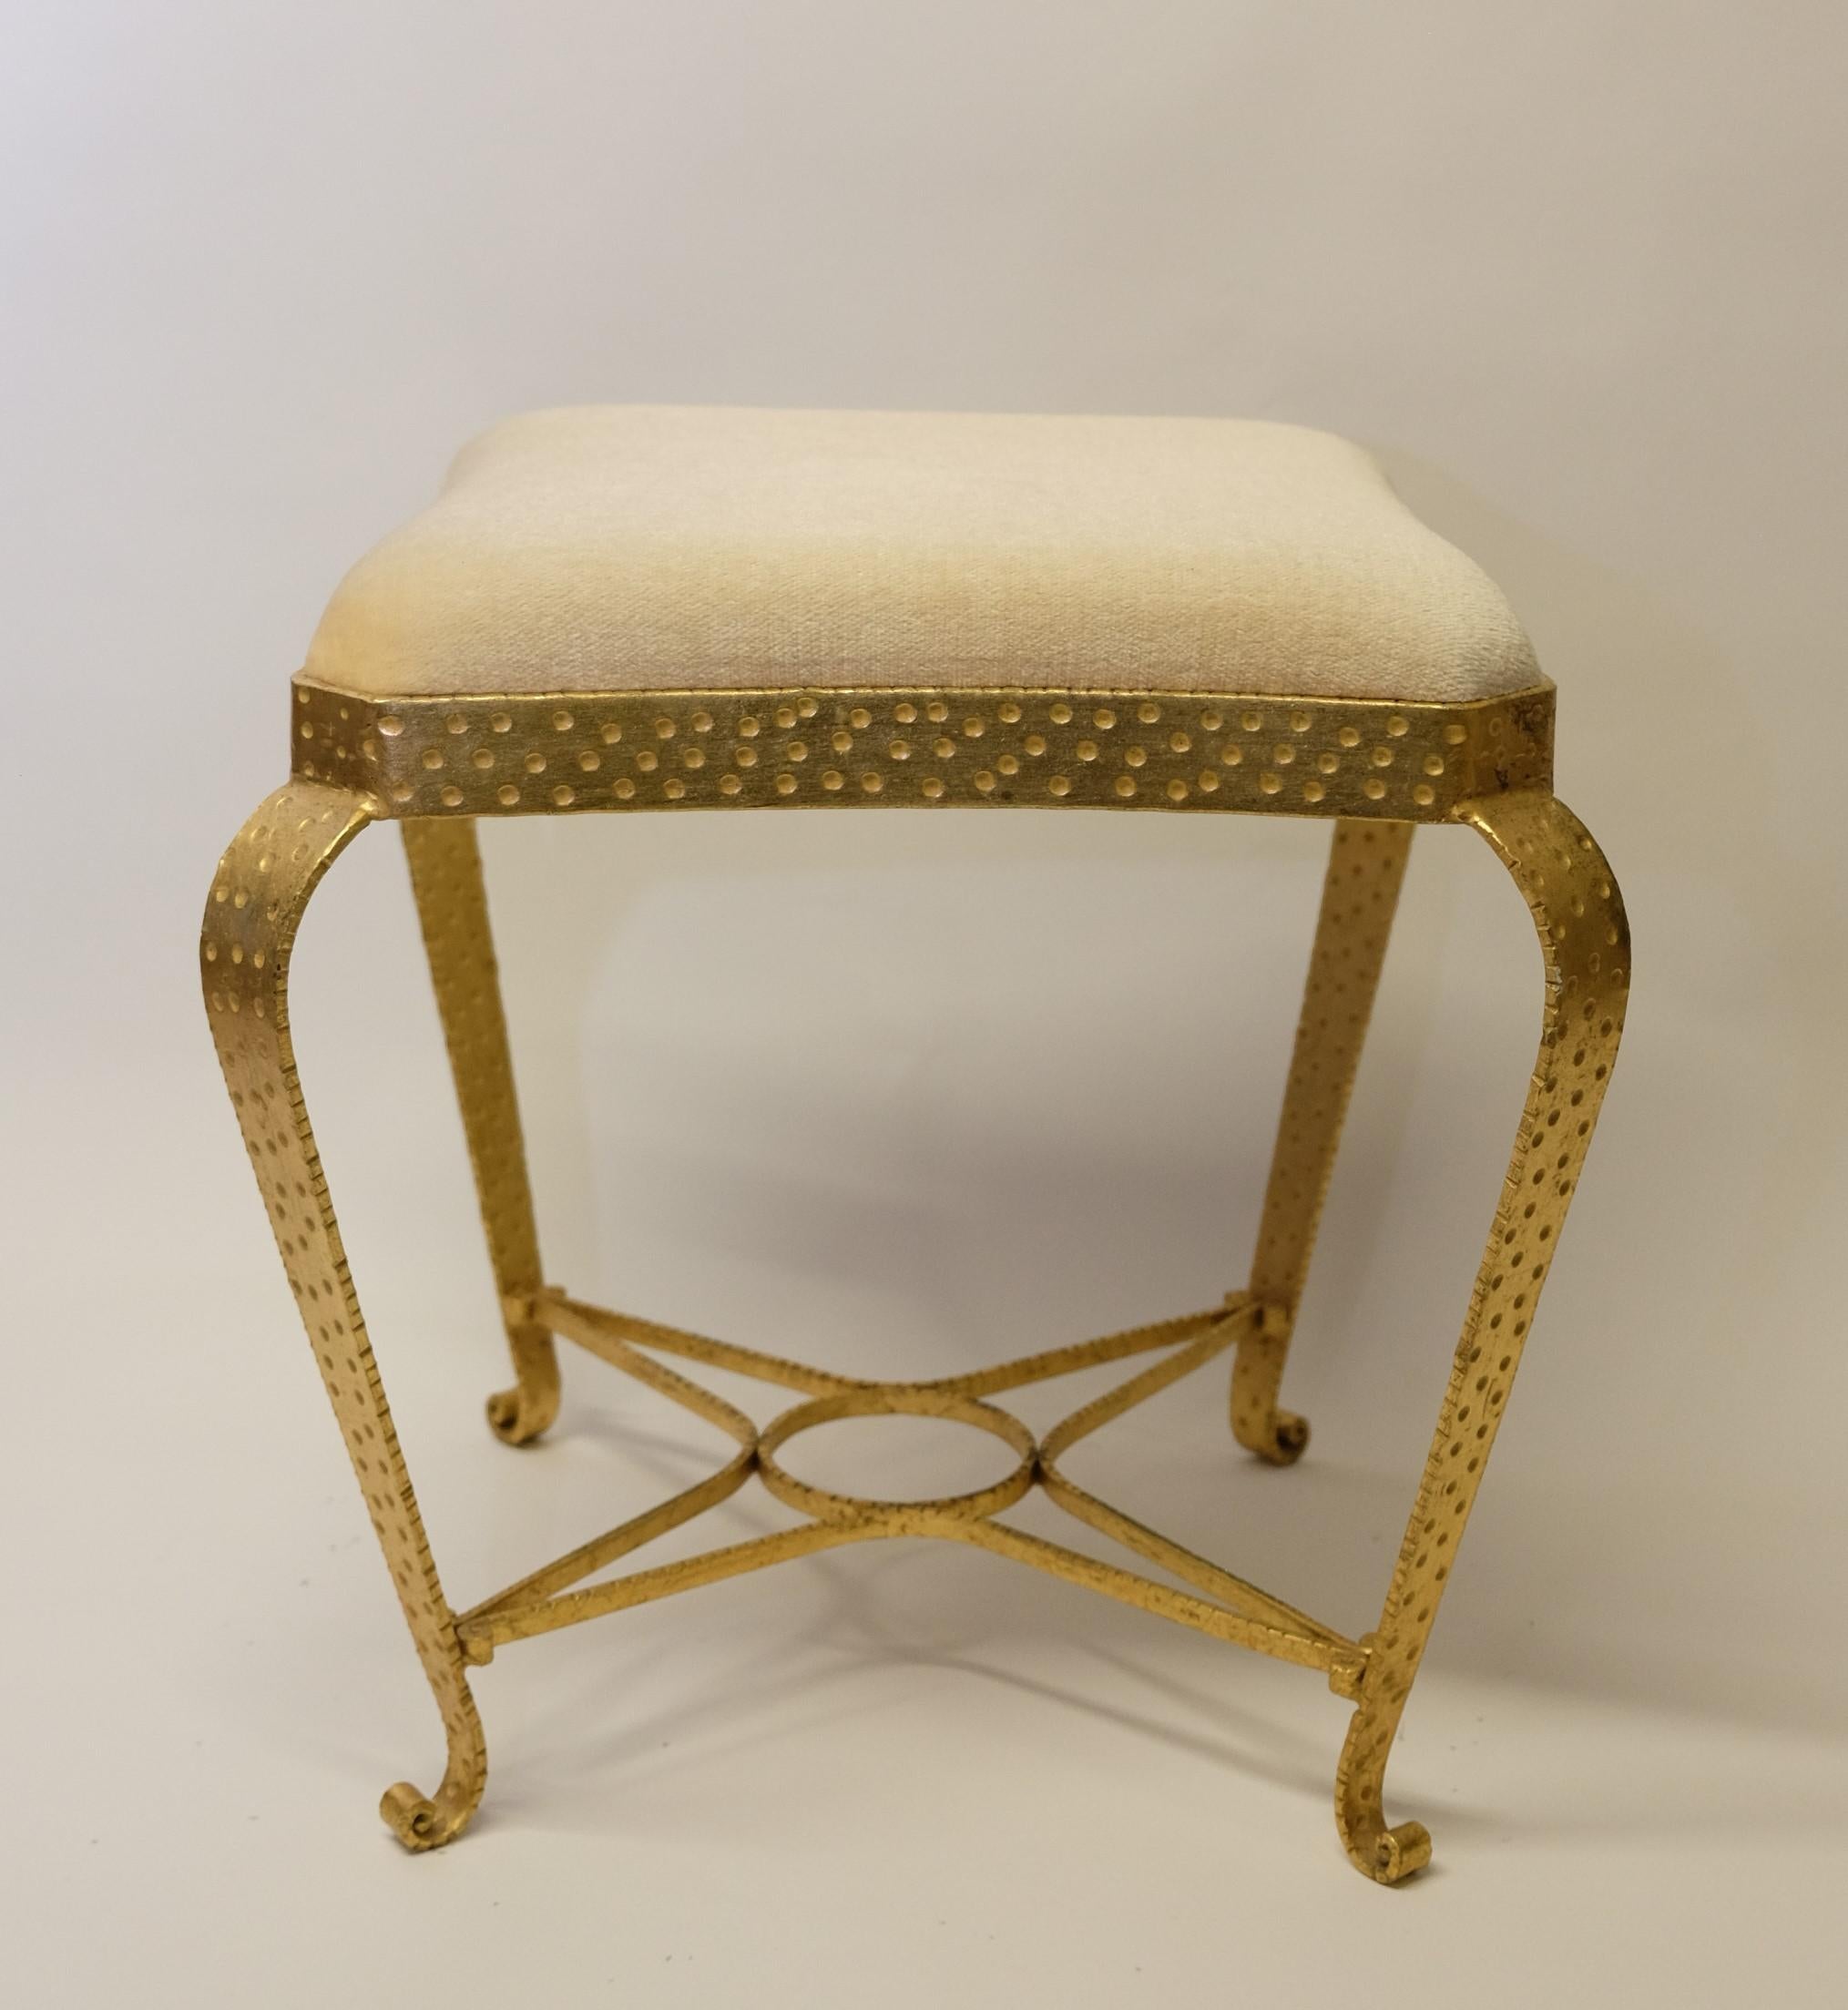 Mid-20th Century Stool in Gilt Metal by Pier Luigi Colli, Italy 1950s For Sale